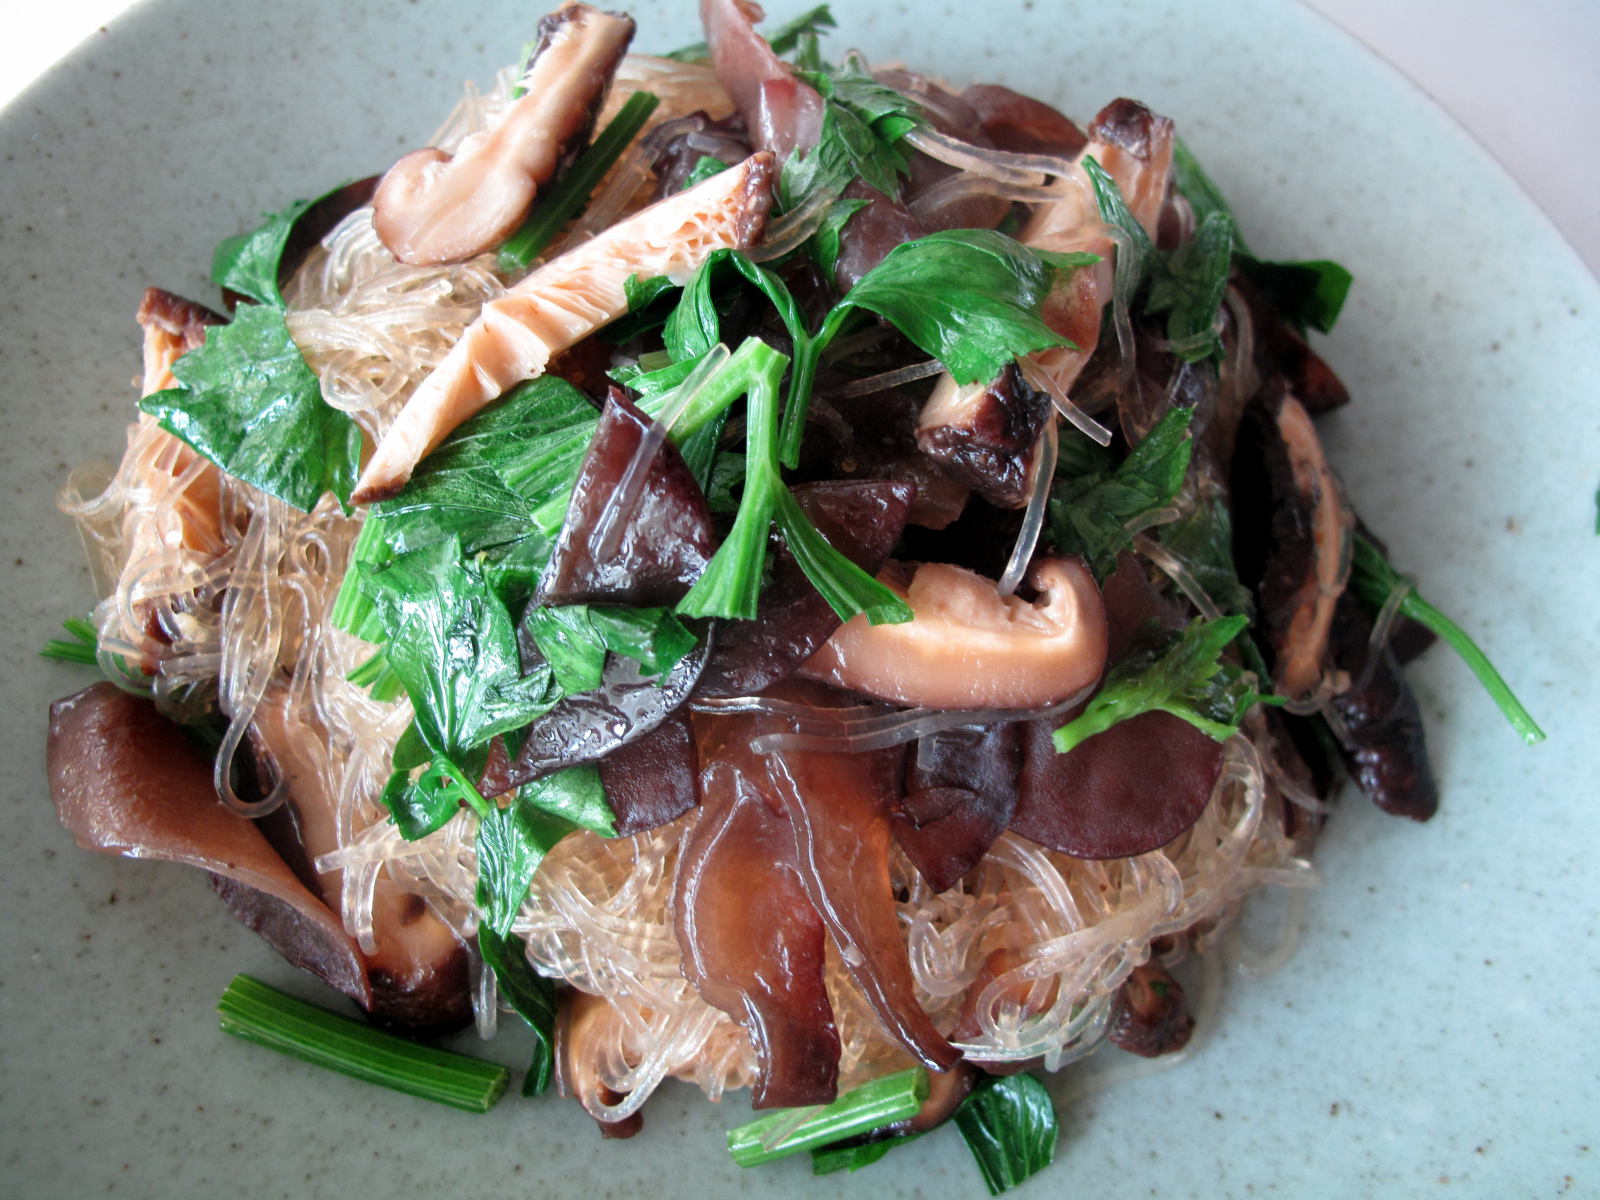 Glass Noodles Stir-fried with Mushrooms